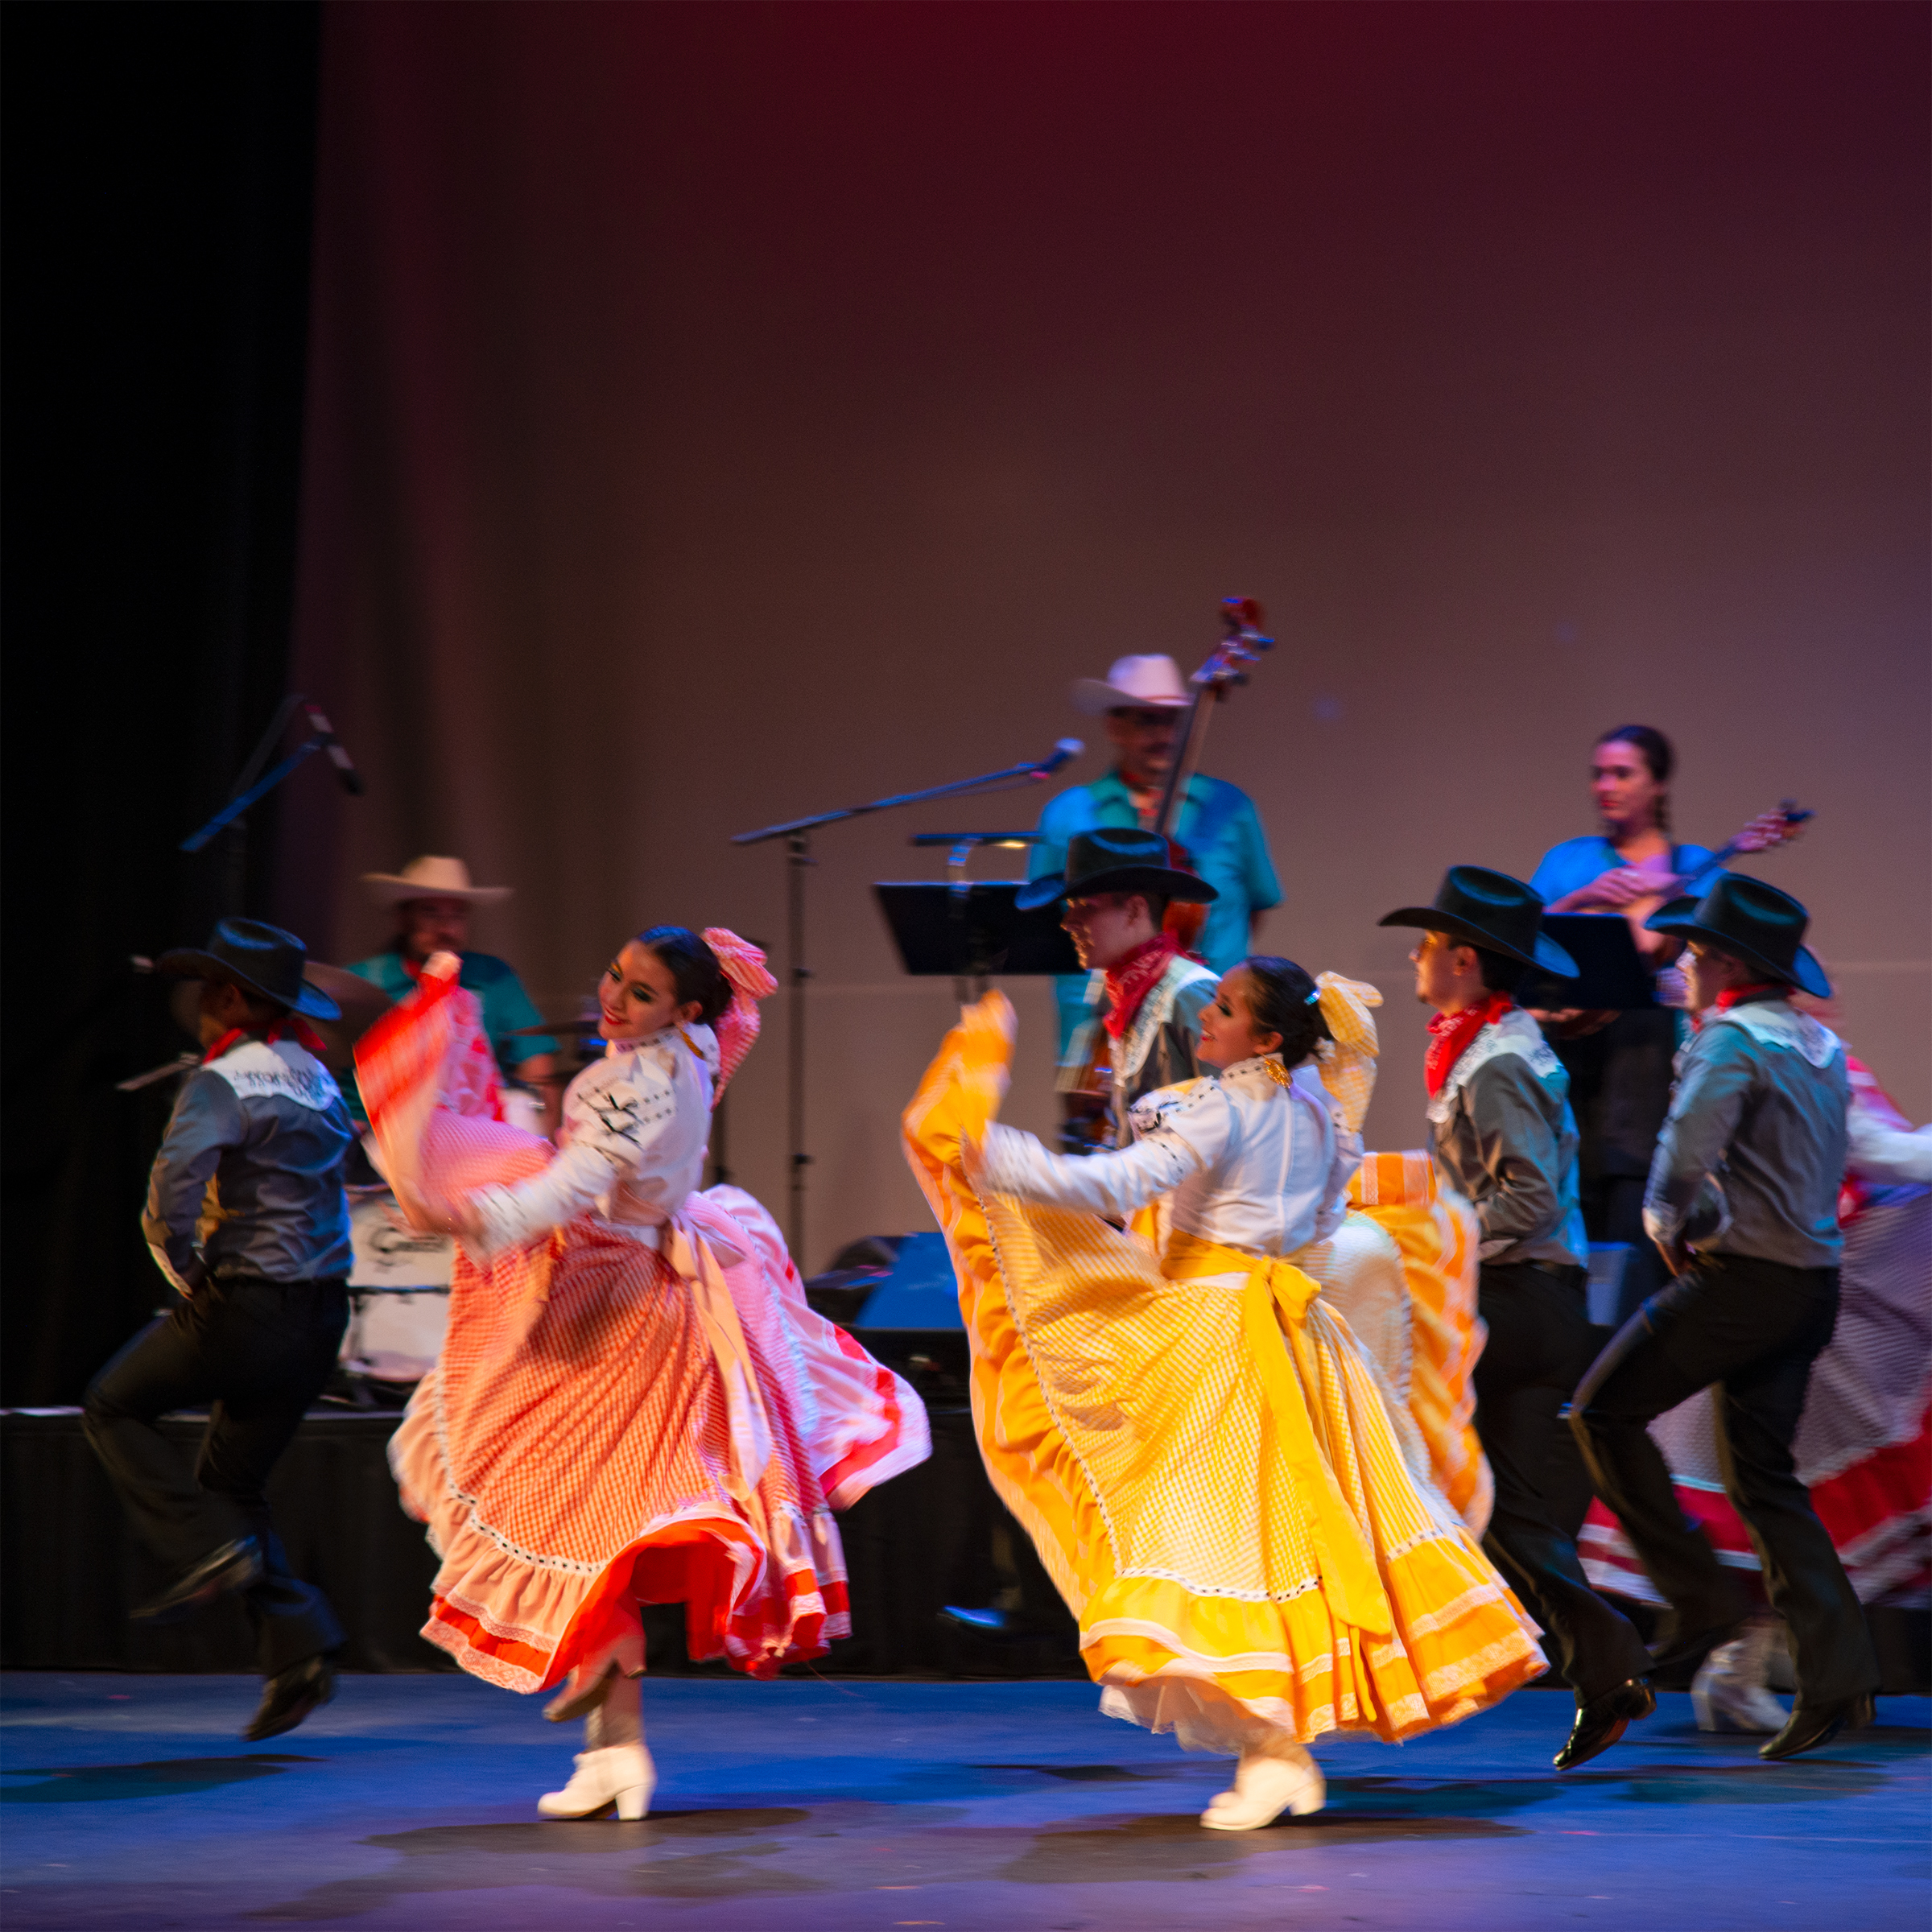 The Mexican Dance Company performing a number from Northern Mexico